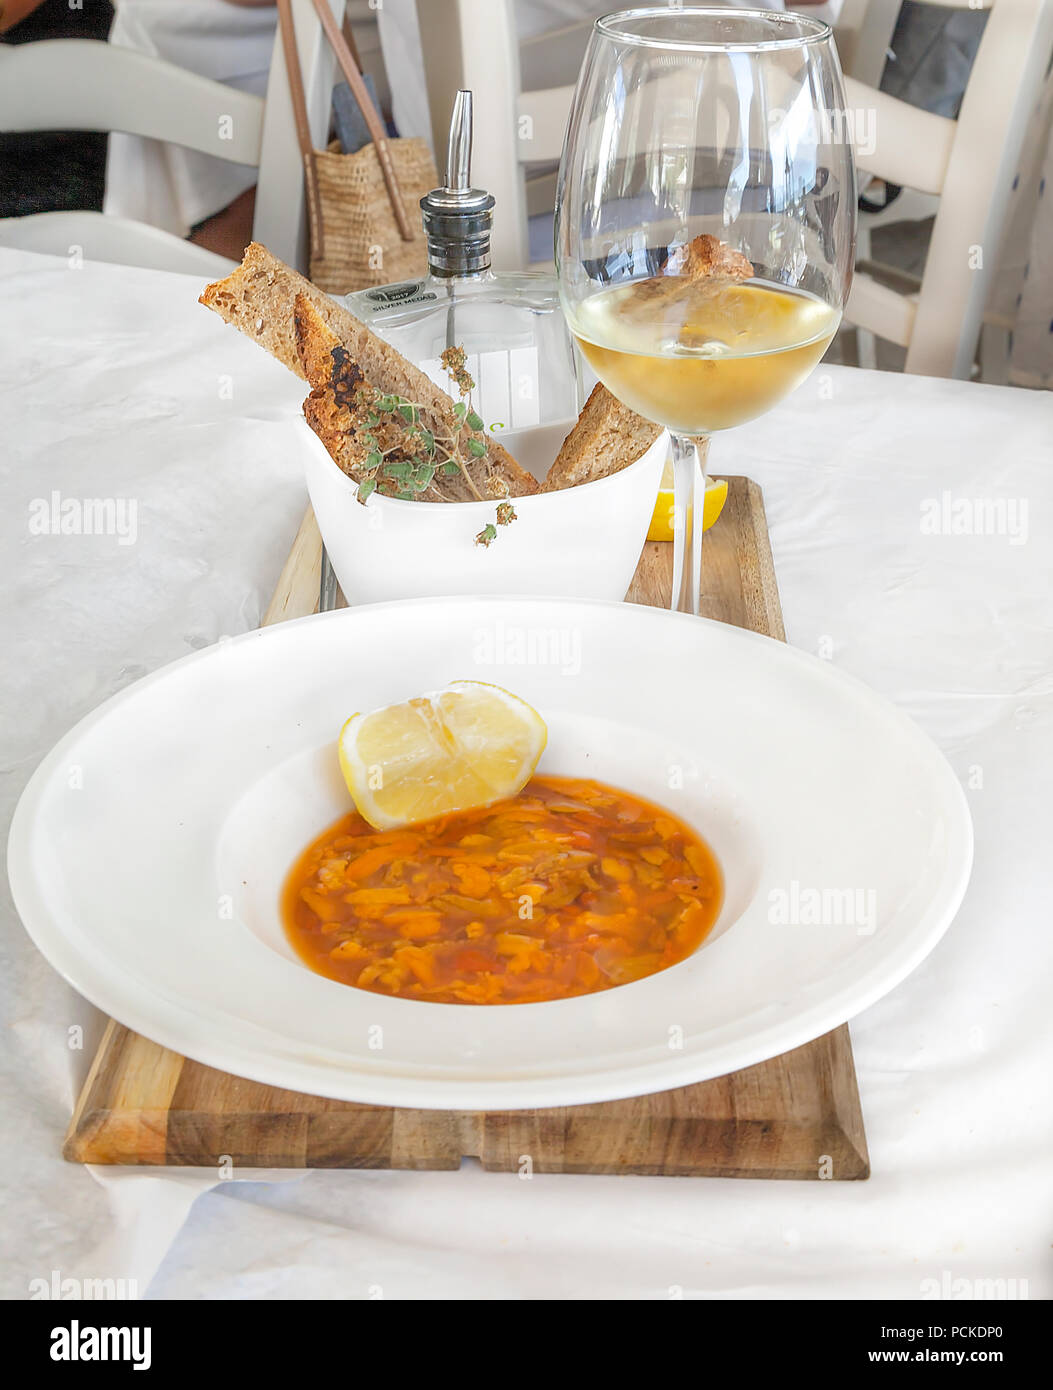 Fresh Sea Urchin starter served and displayed on a table with a glass of white wine and brown bread to accompany the delicate dish  . Stock Image. Stock Photo